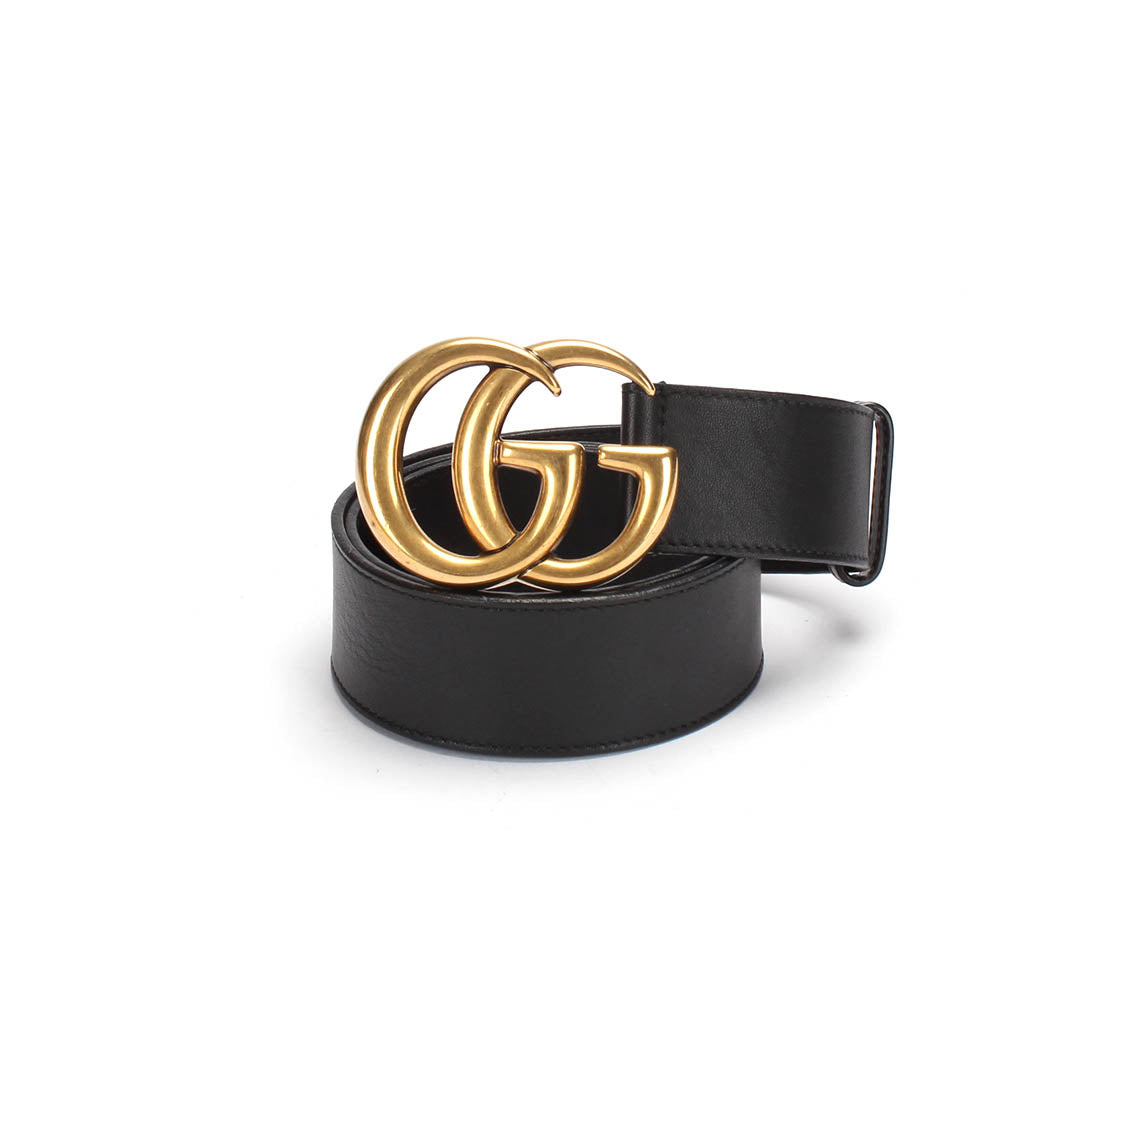 GG Marmont Leather Belt 400593